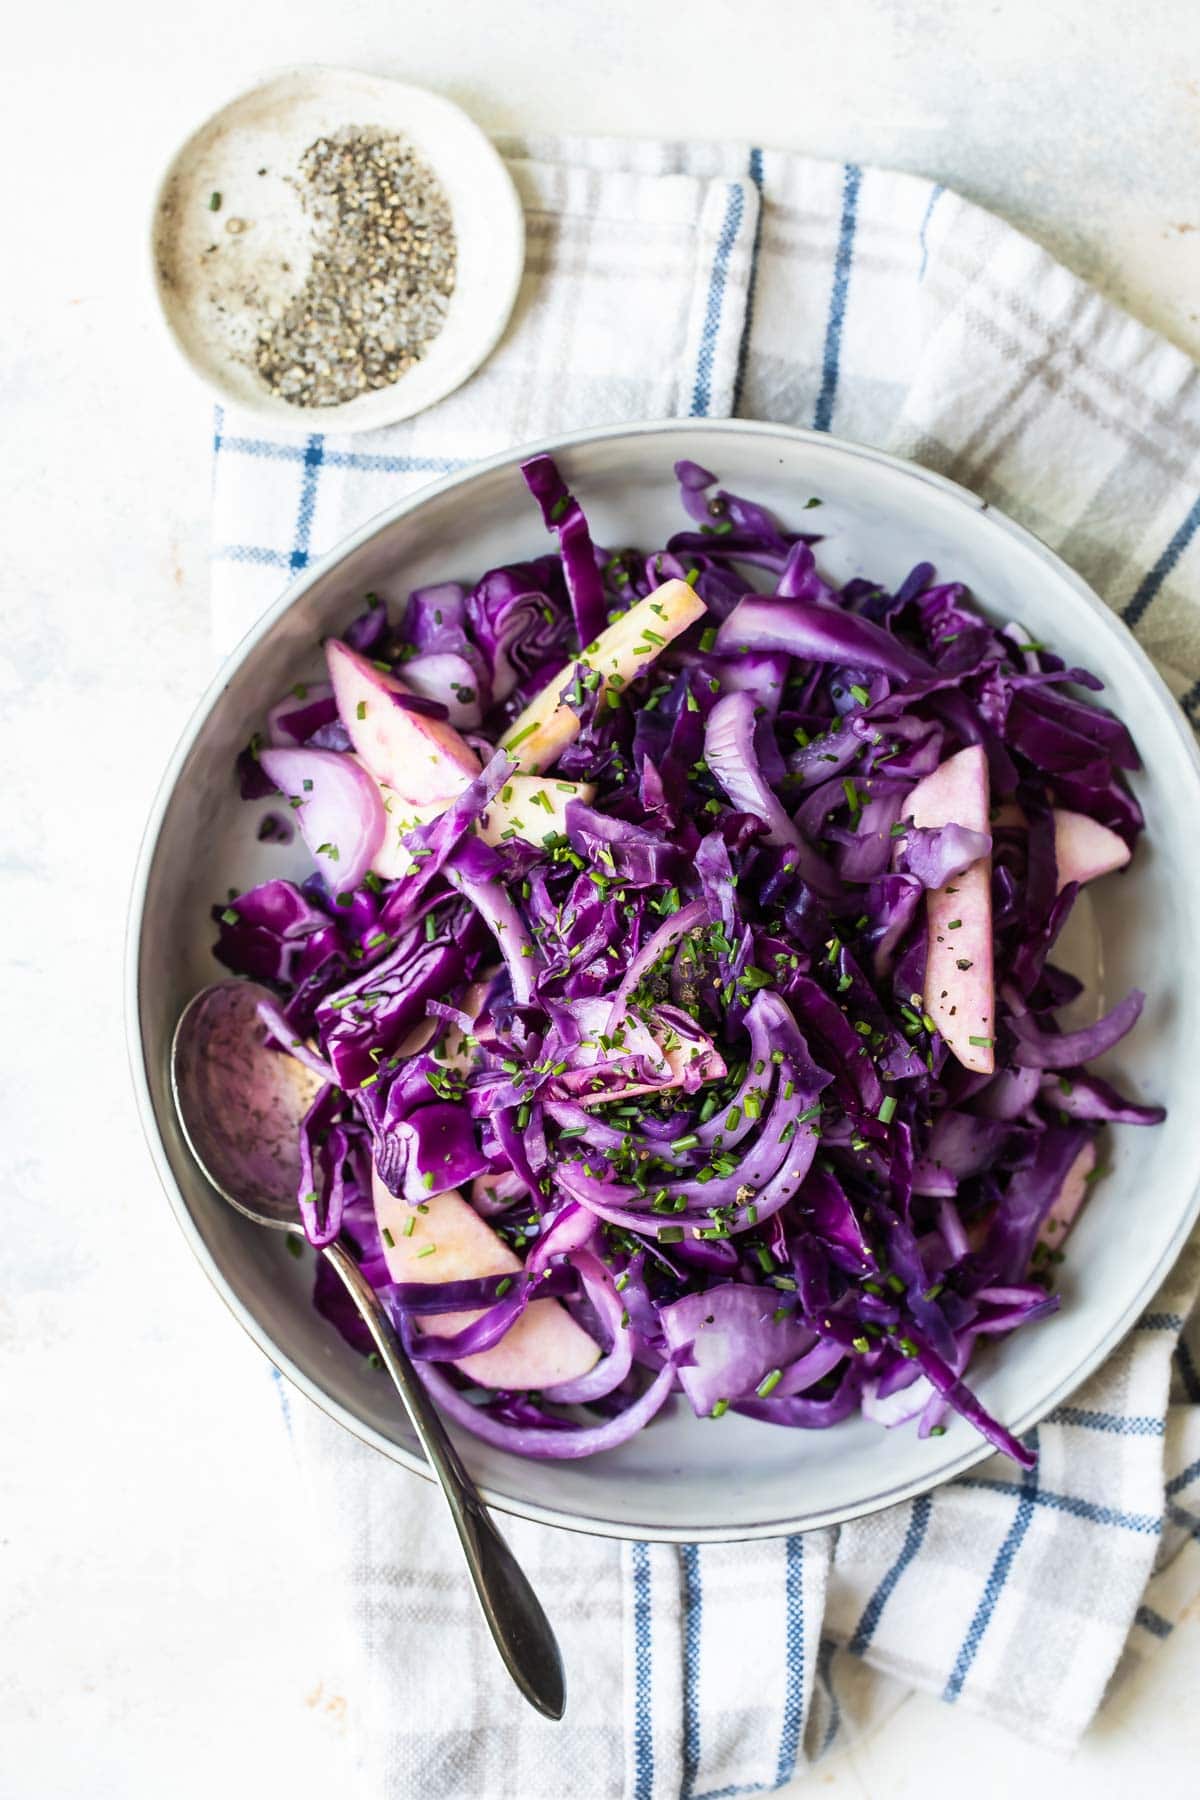 A bowl of braised red cabbage.